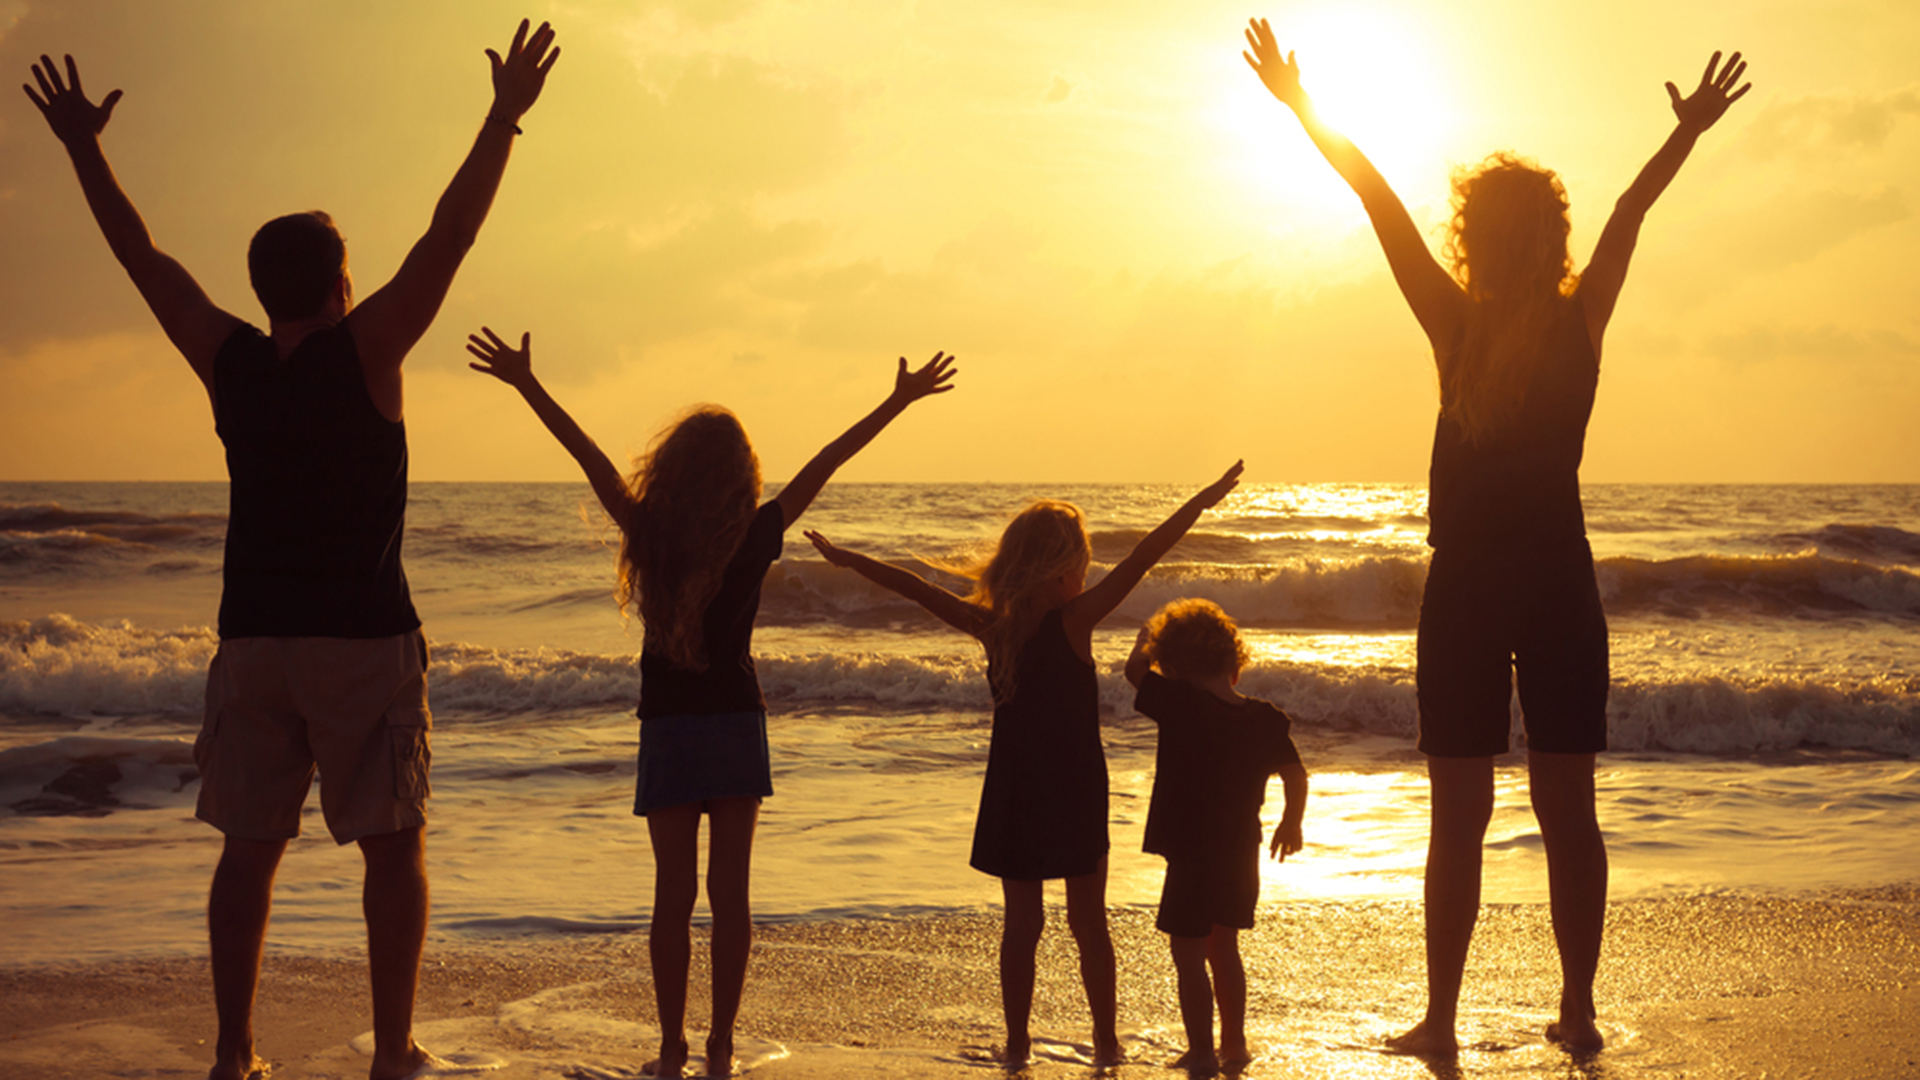 Happy family standing on the beach on the dawn time; Shutterstock ID 132280652; PO: david-today